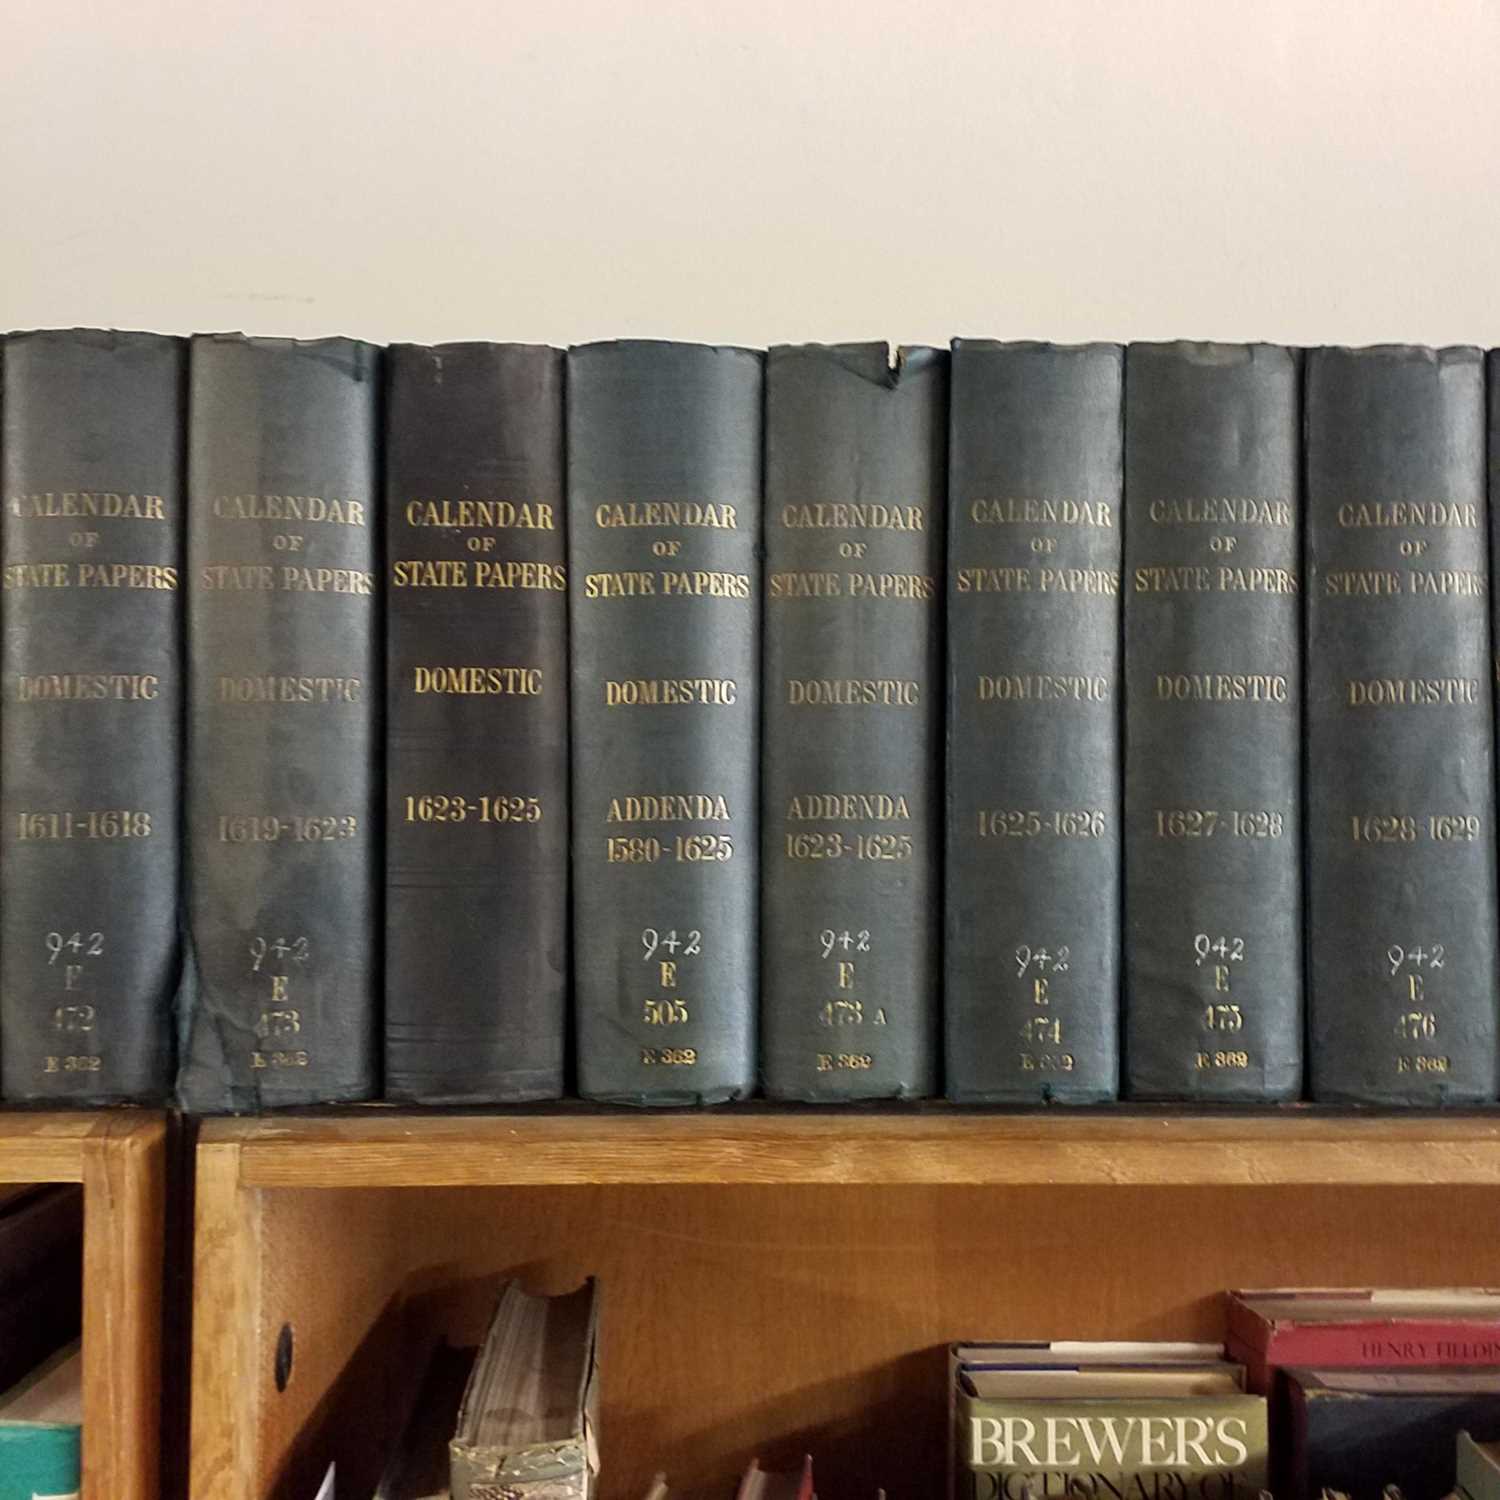 Lot 497 Calendar of State Papers. 67 volumes